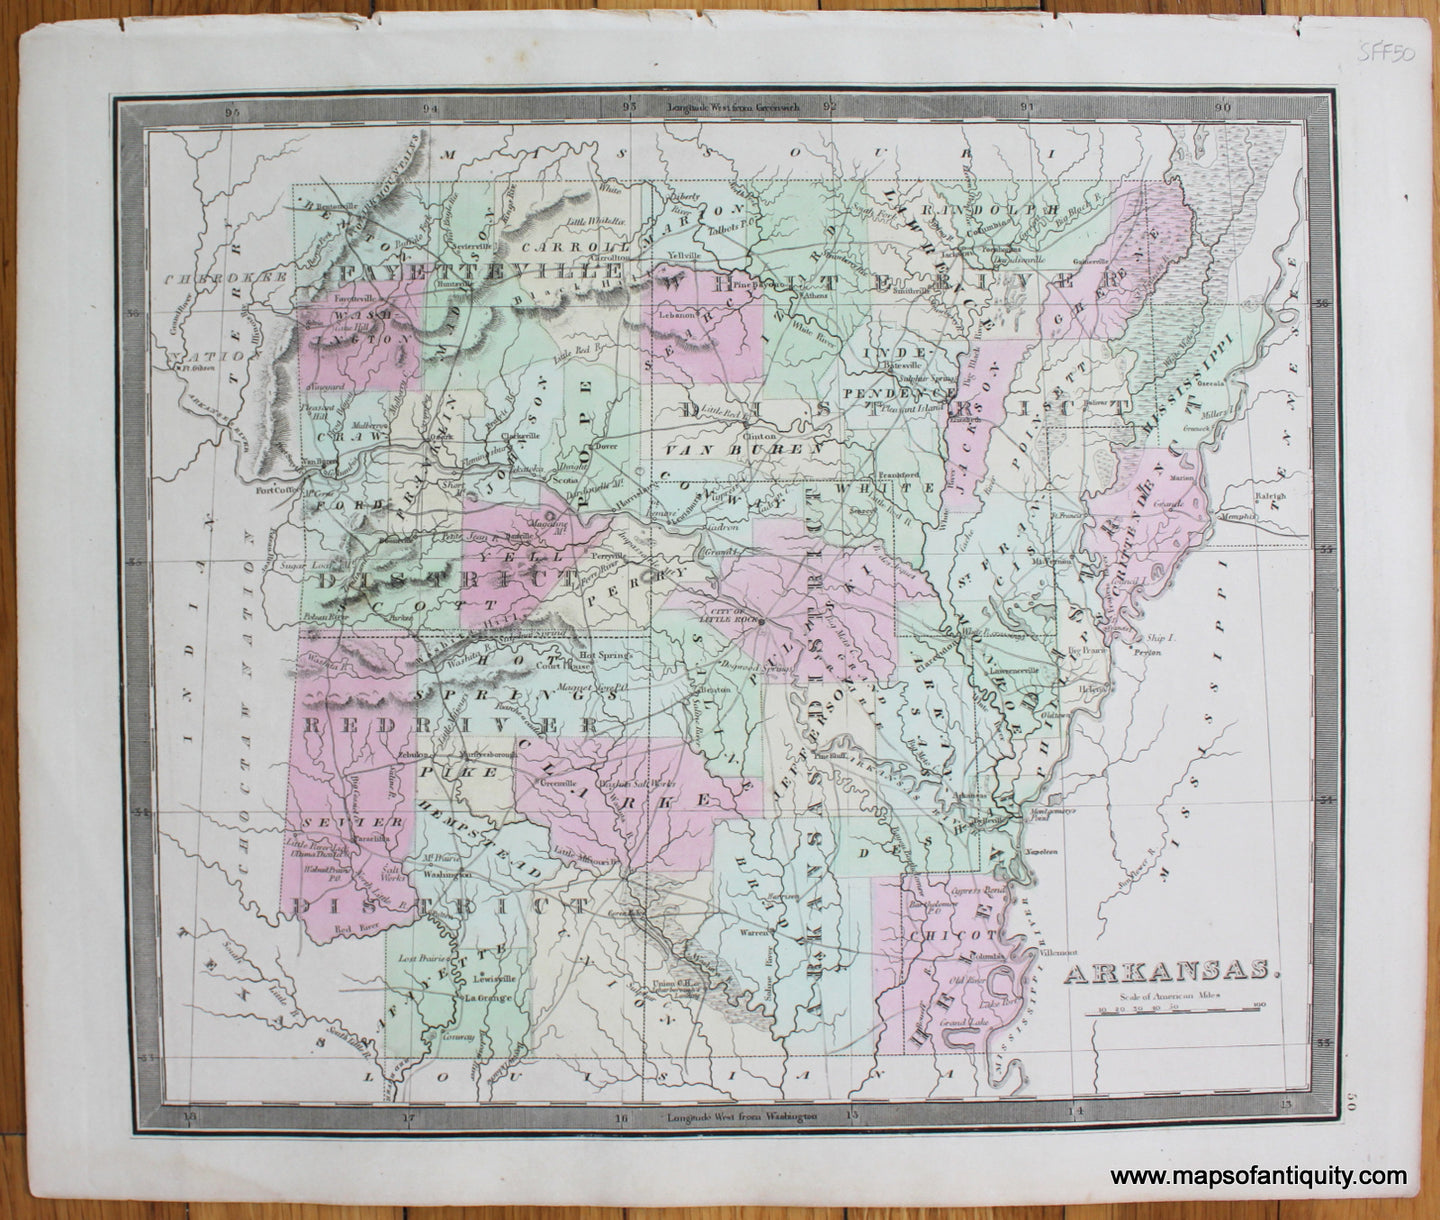 Antique-Hand-Colored-Map-Arkansas.-United-States-South-1848-Jeremiah-Greenleaf-Maps-Of-Antiquity